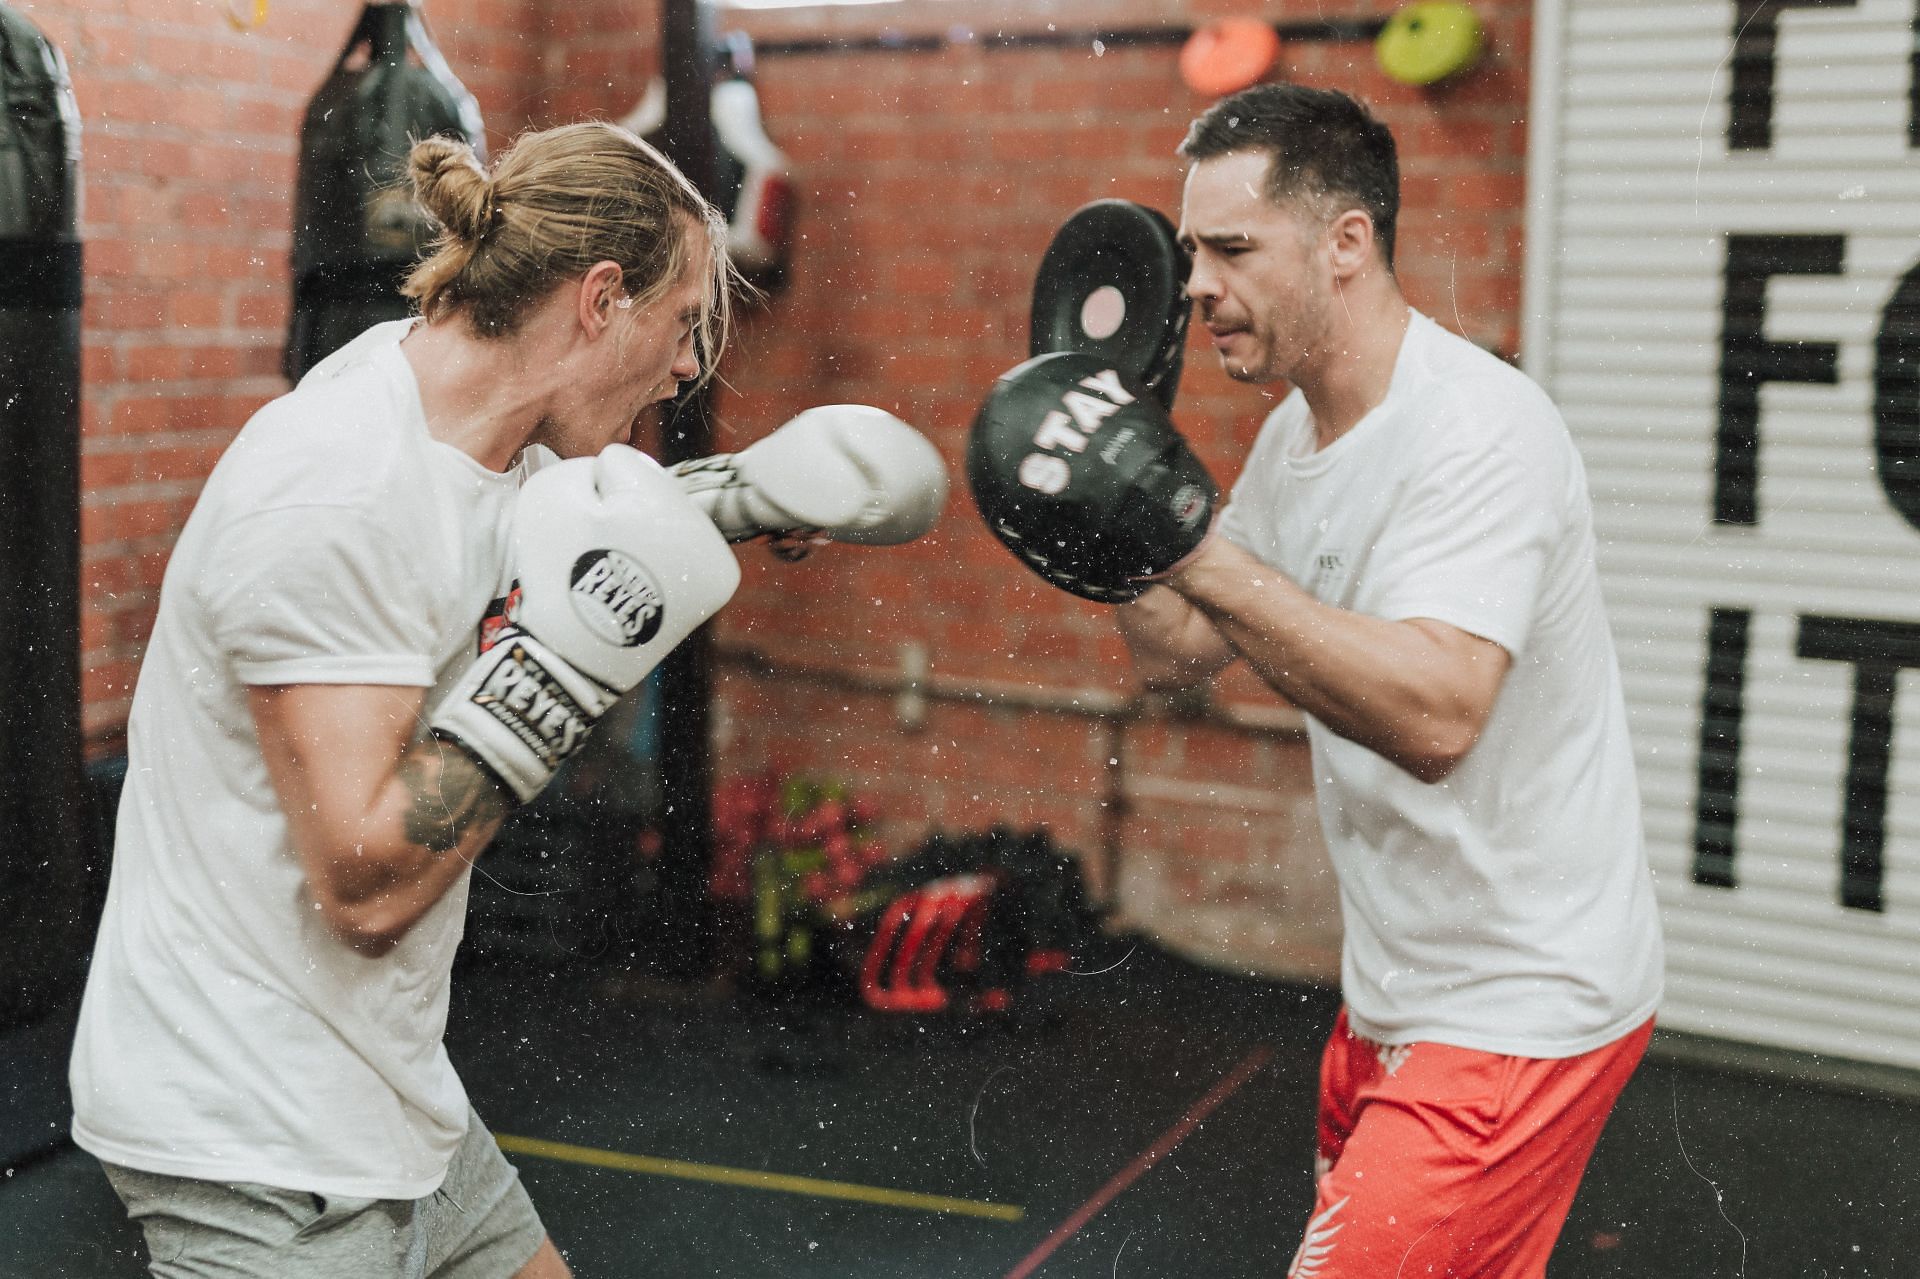 Boxing exercises are a great way to boost muscular endurance. (Image via Unsplash / Mark Adriane)